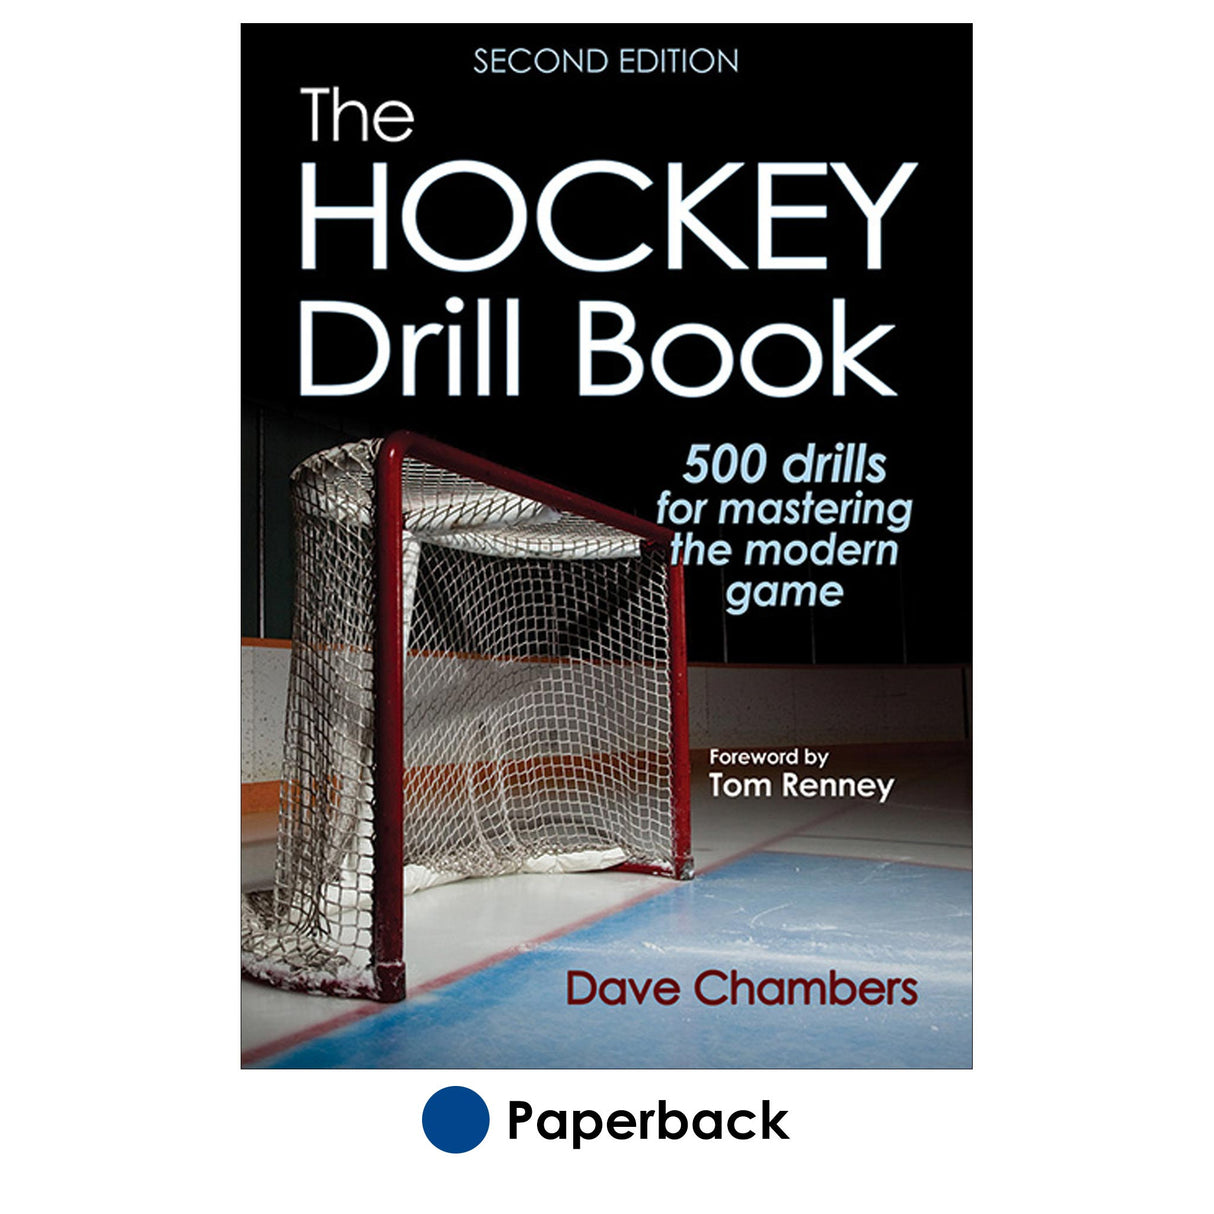 Hockey Drill Book 2nd Edition, The